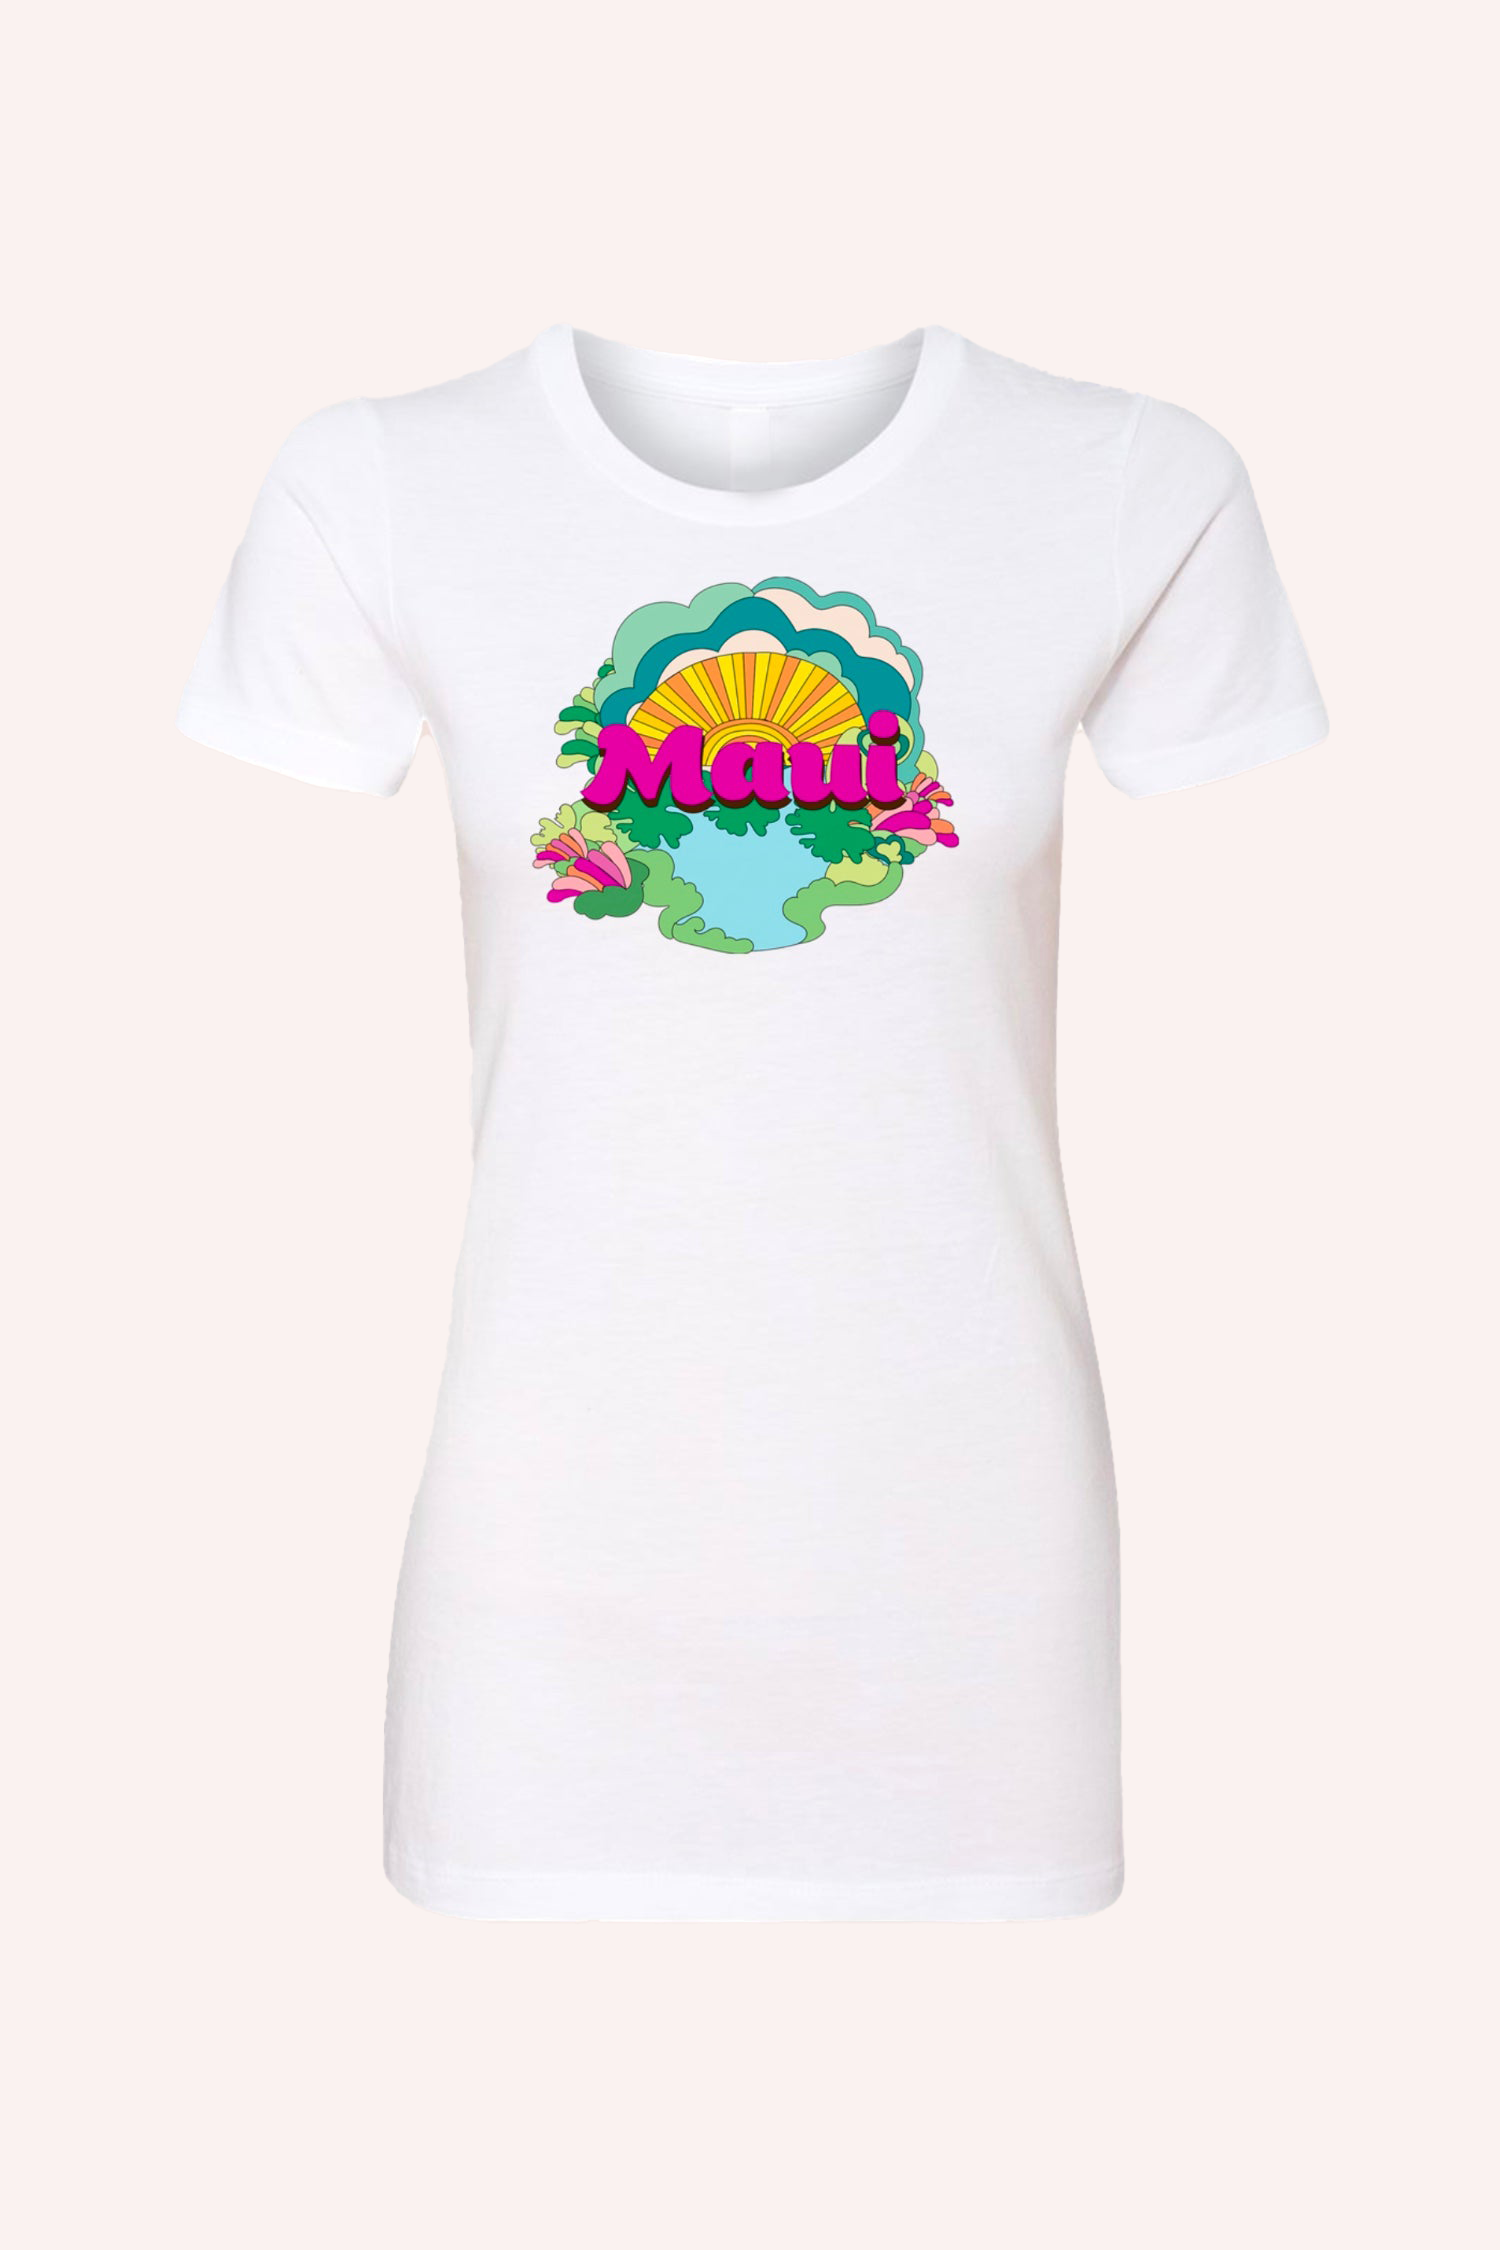 Fitted Maui Tee, white, short sleeves, round collar, print on the bust with MAUI and a Hawaiian design